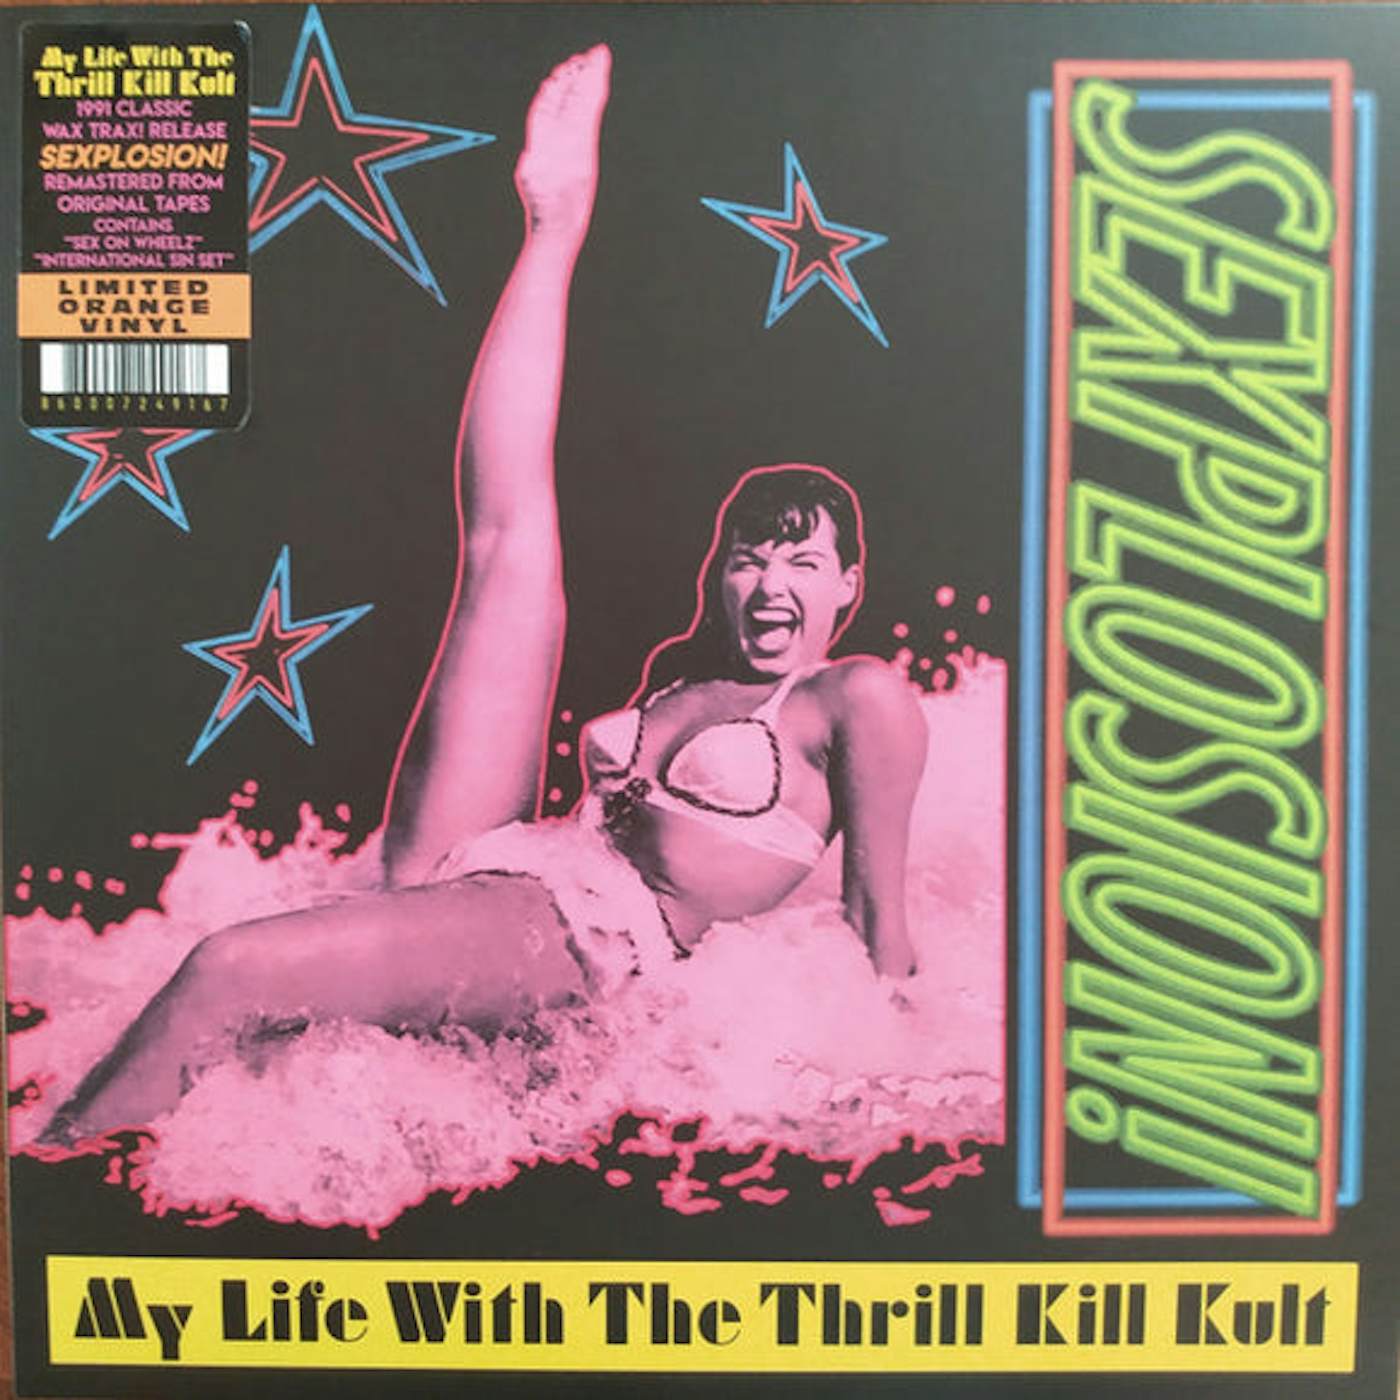 My Life With The Thrill Kill Kult Sexplosion! (Reissue/Limited/Orange) Vinyl Record